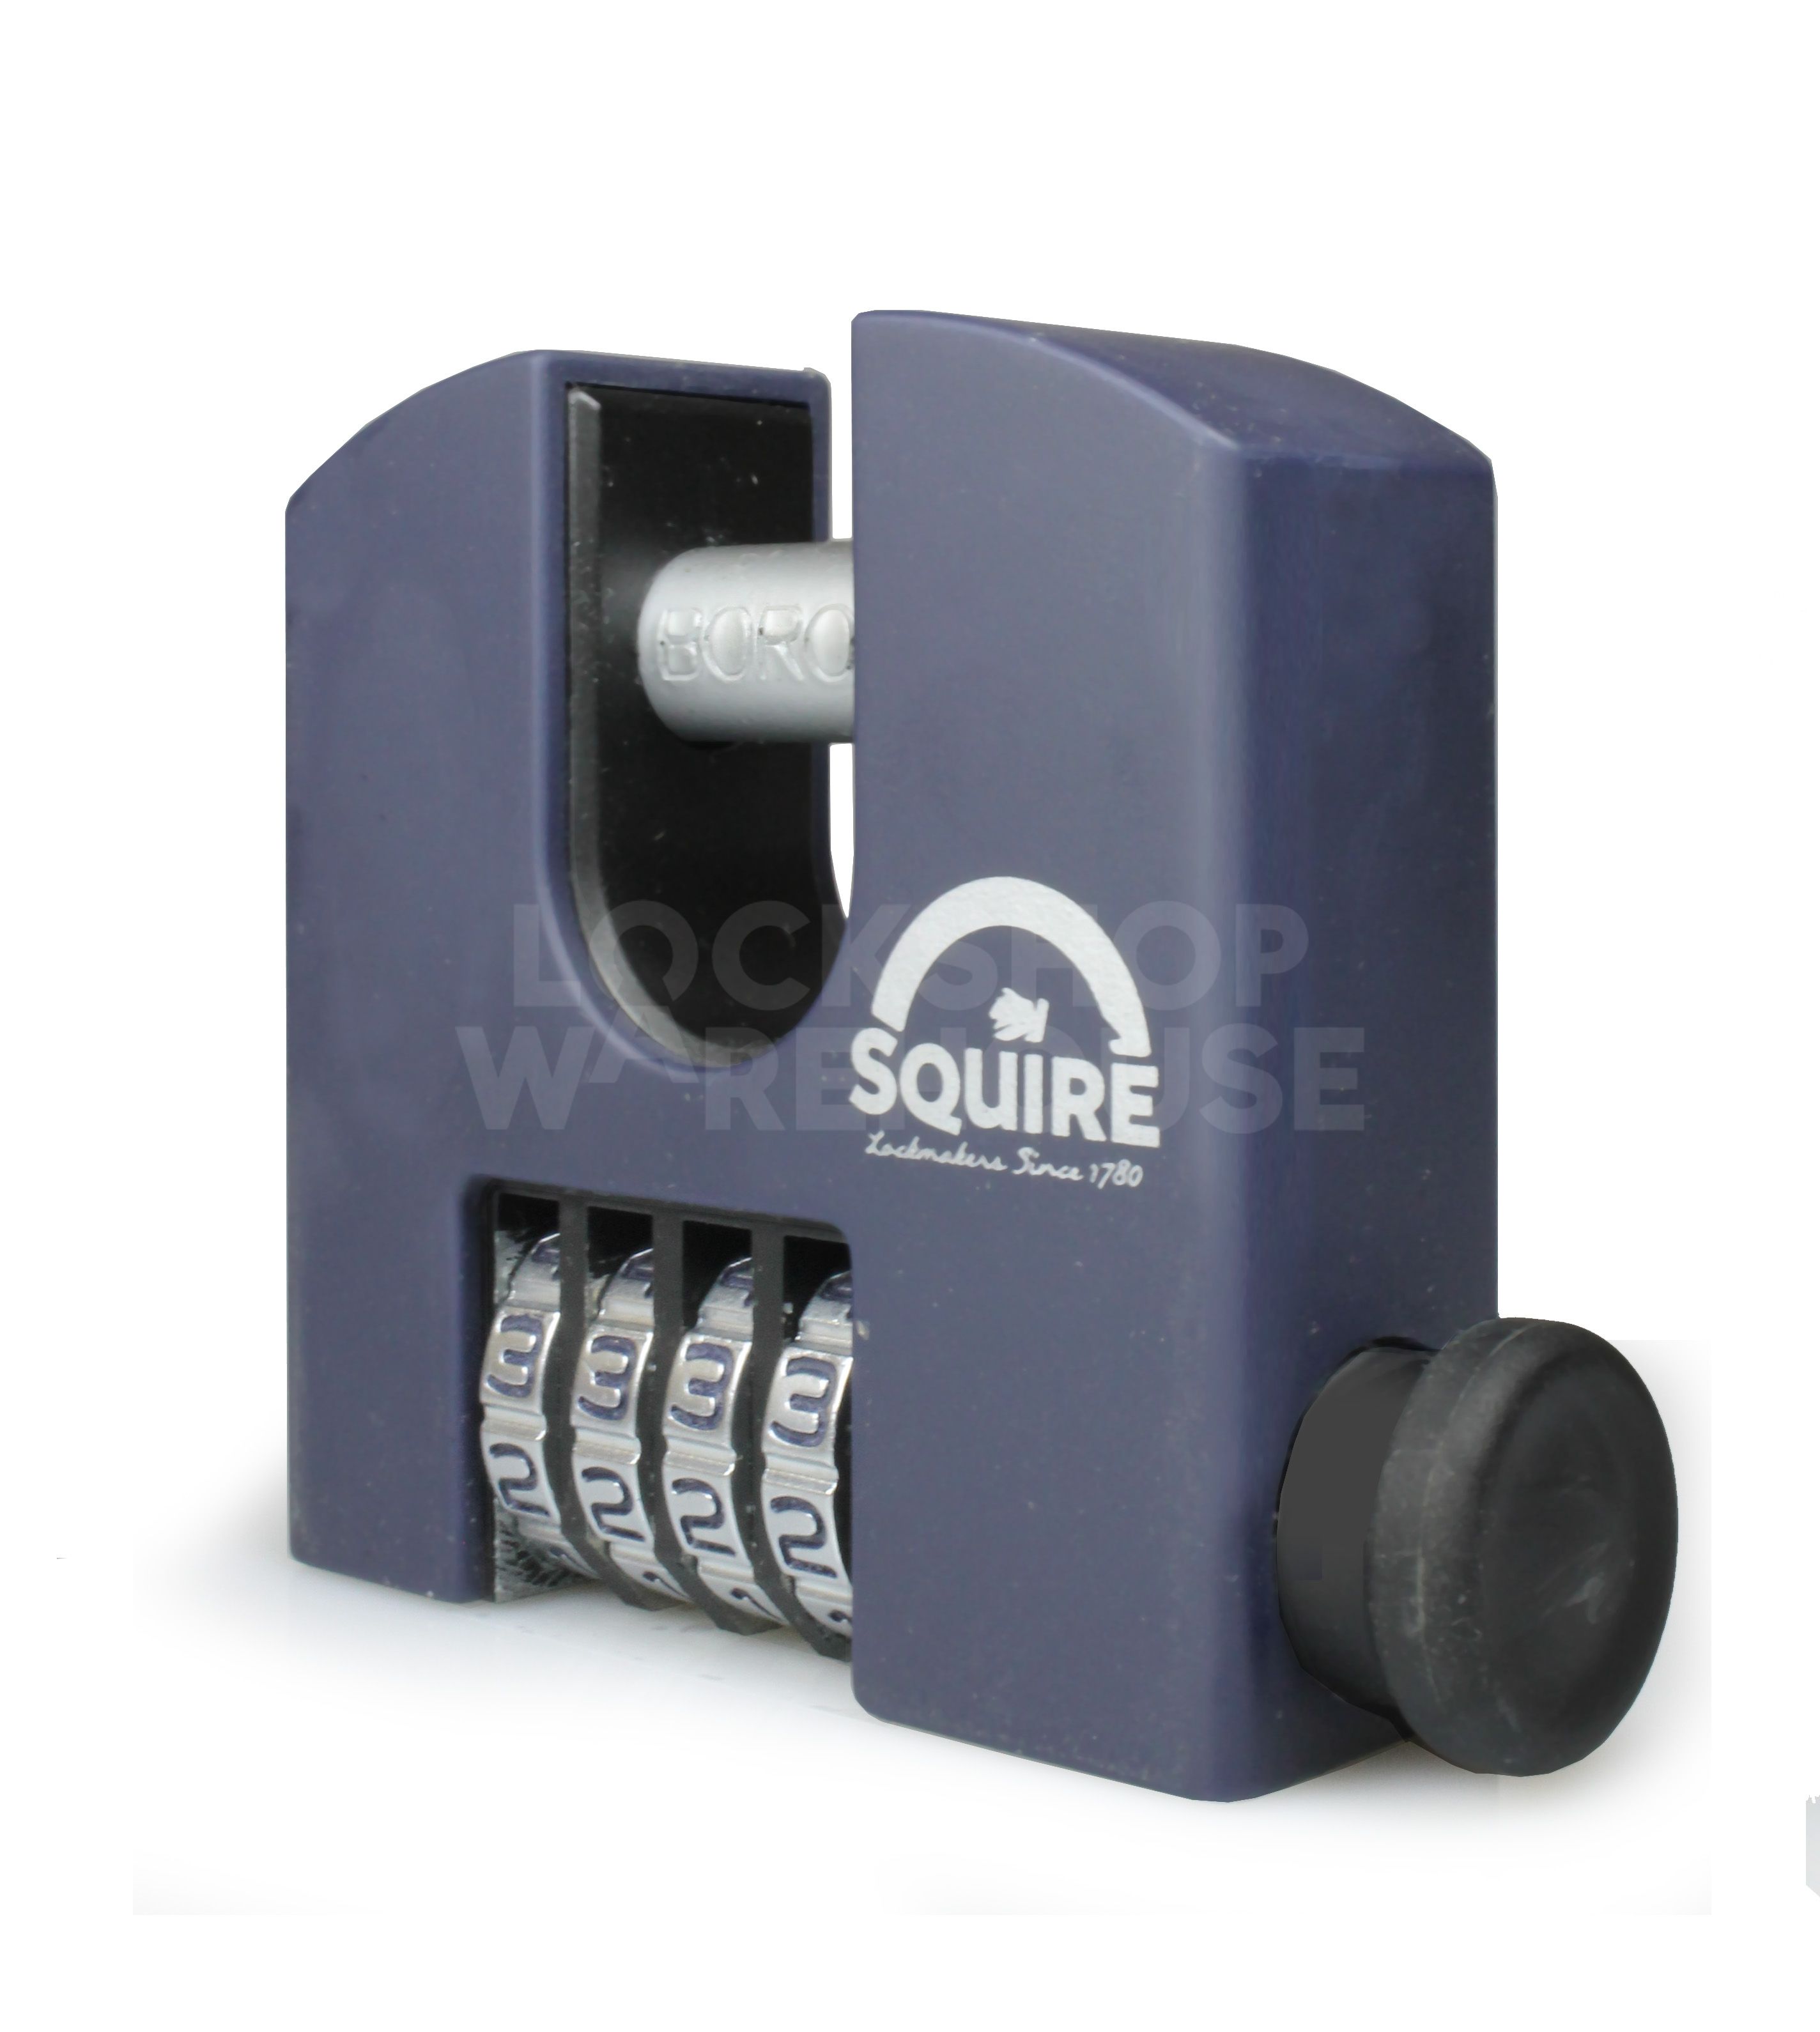 SQUIRE SHCB65 Stronghold® 4 Wheel Padlock